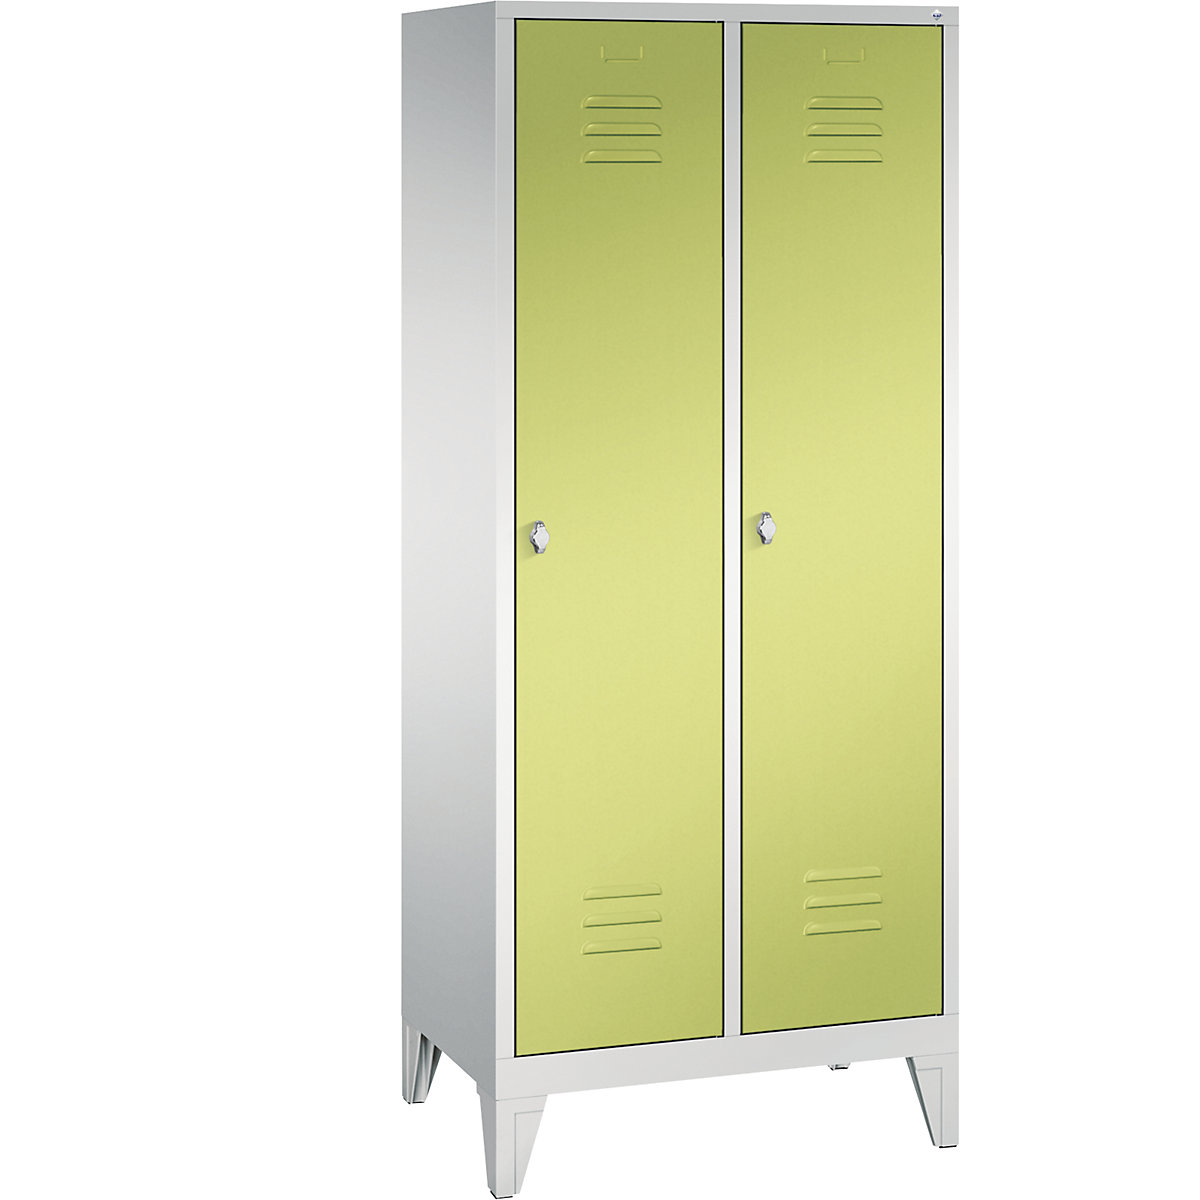 CLASSIC storage cupboard with feet – C+P, 2 compartments, compartment width 400 mm, light grey / viridian green-12